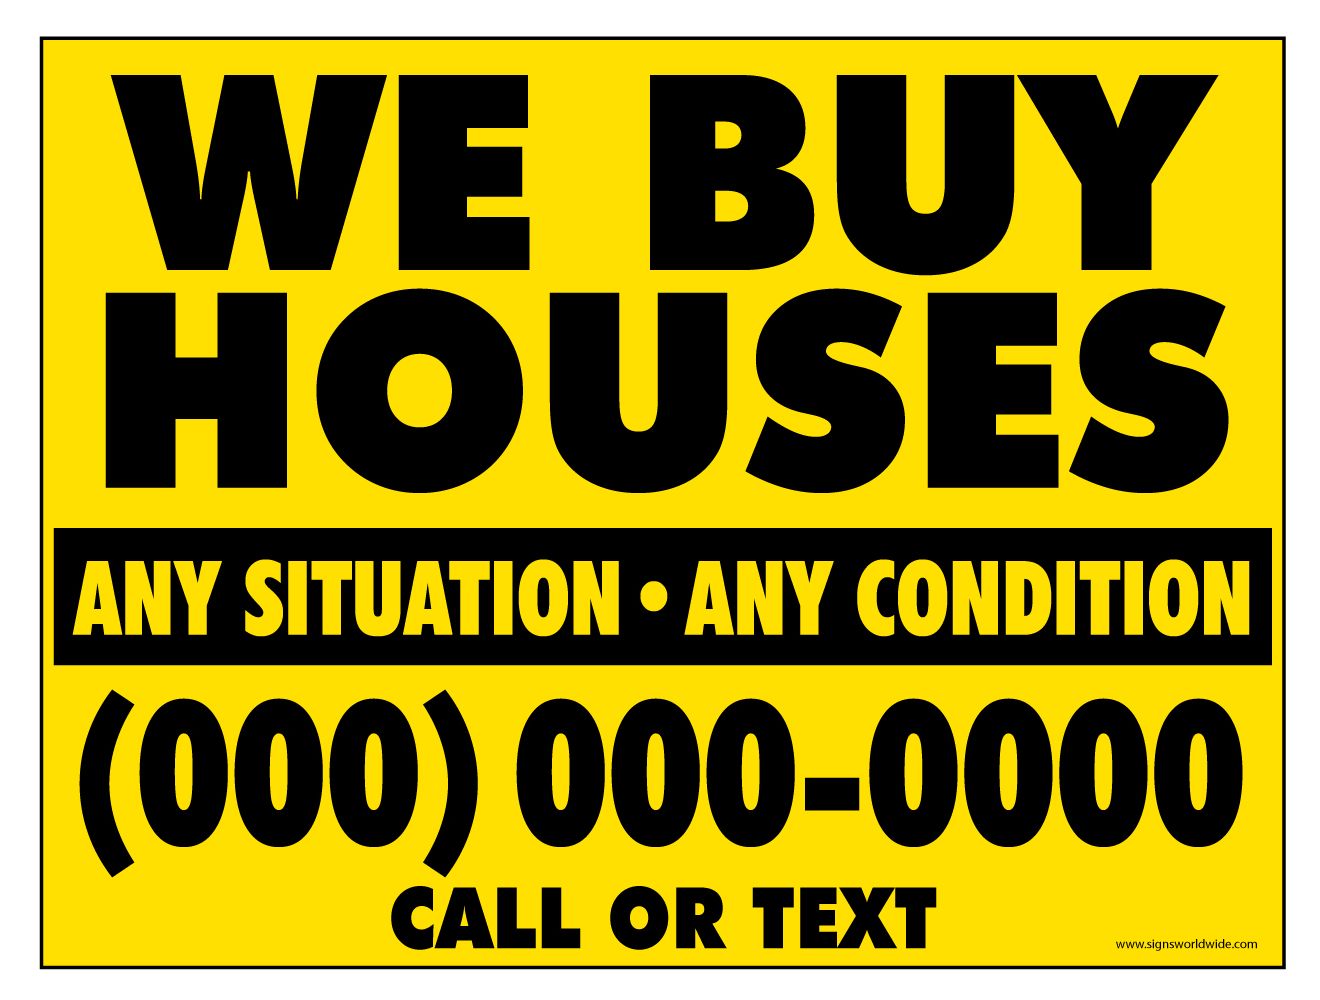 215-669-0295 Thomas Valletto General Contracting, We Buy Houses Bucks  County PA